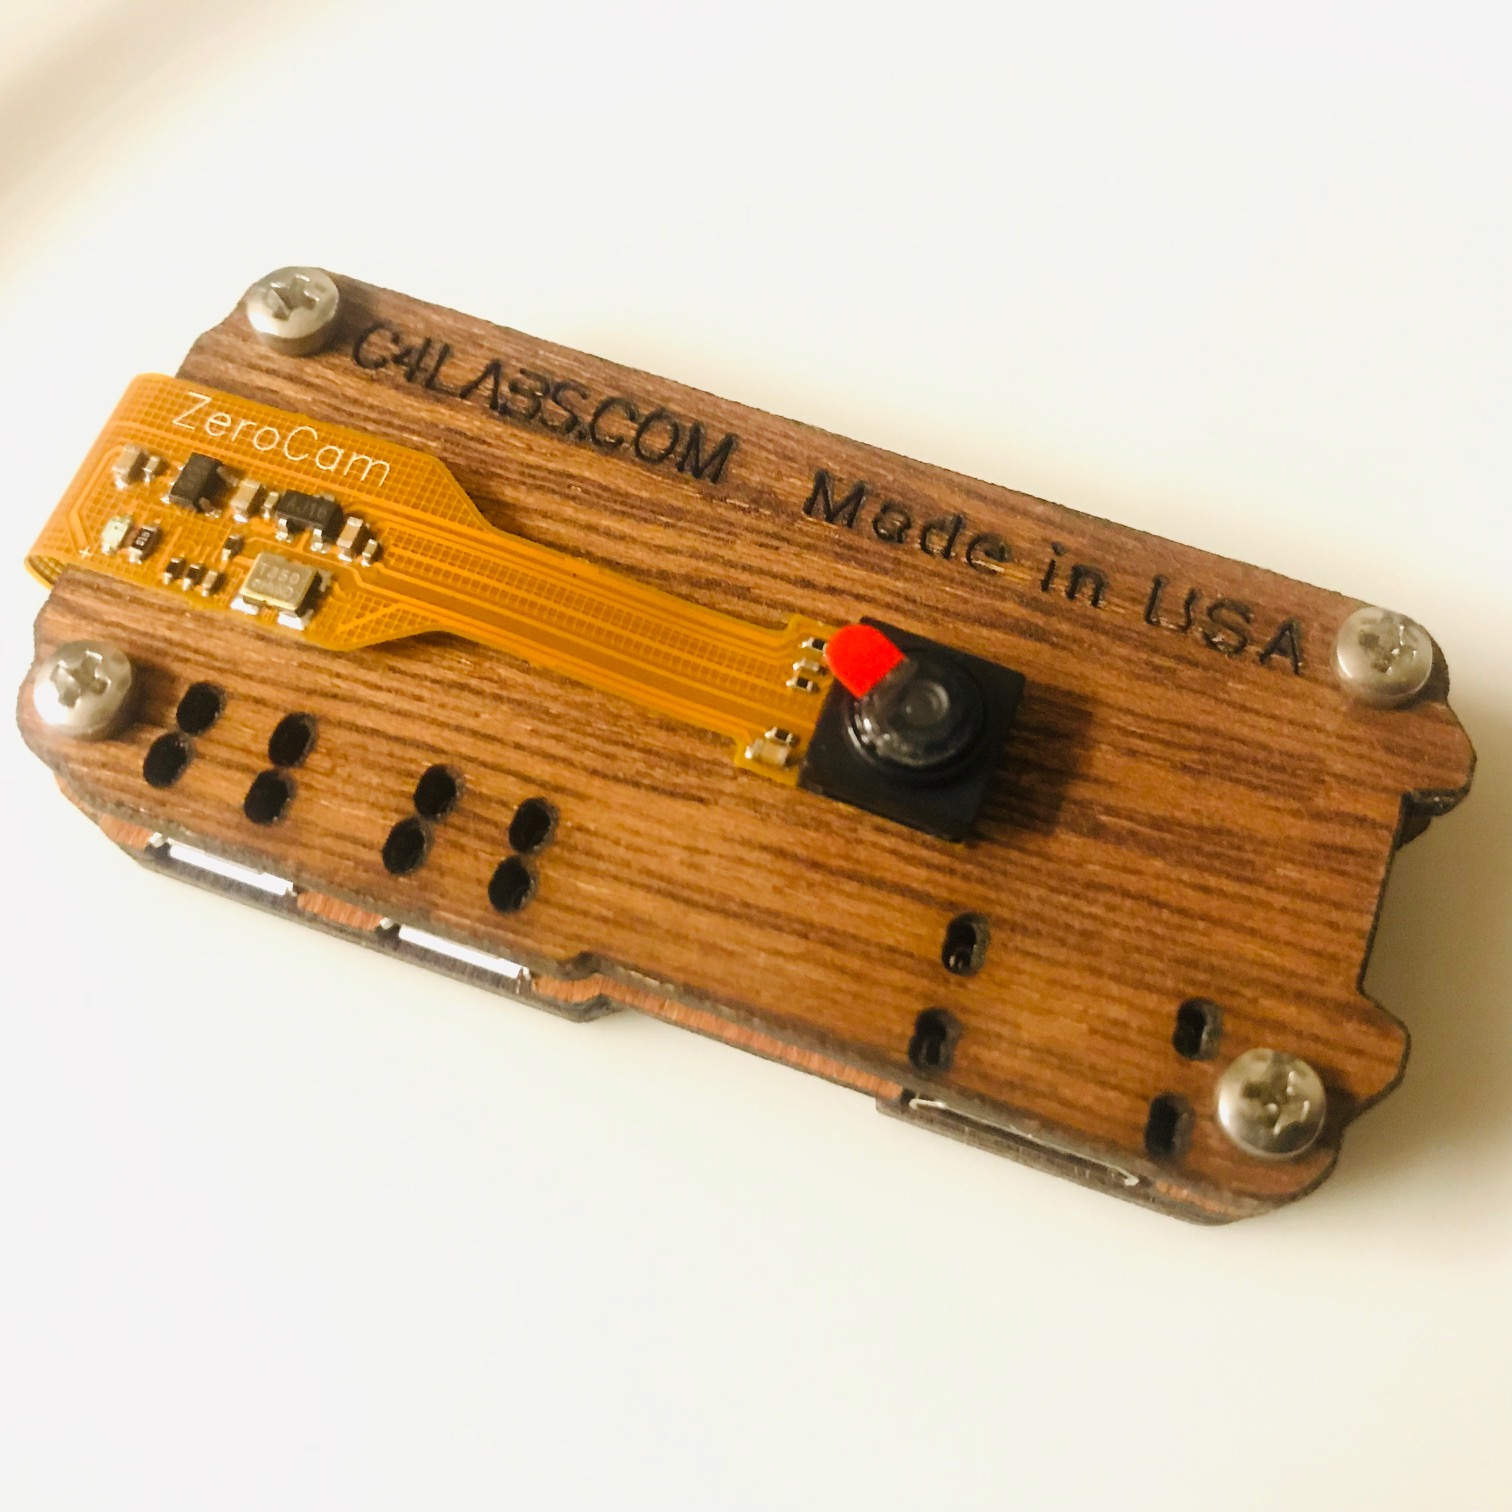 Raspberry Pi Zero in wooden case with camera attached